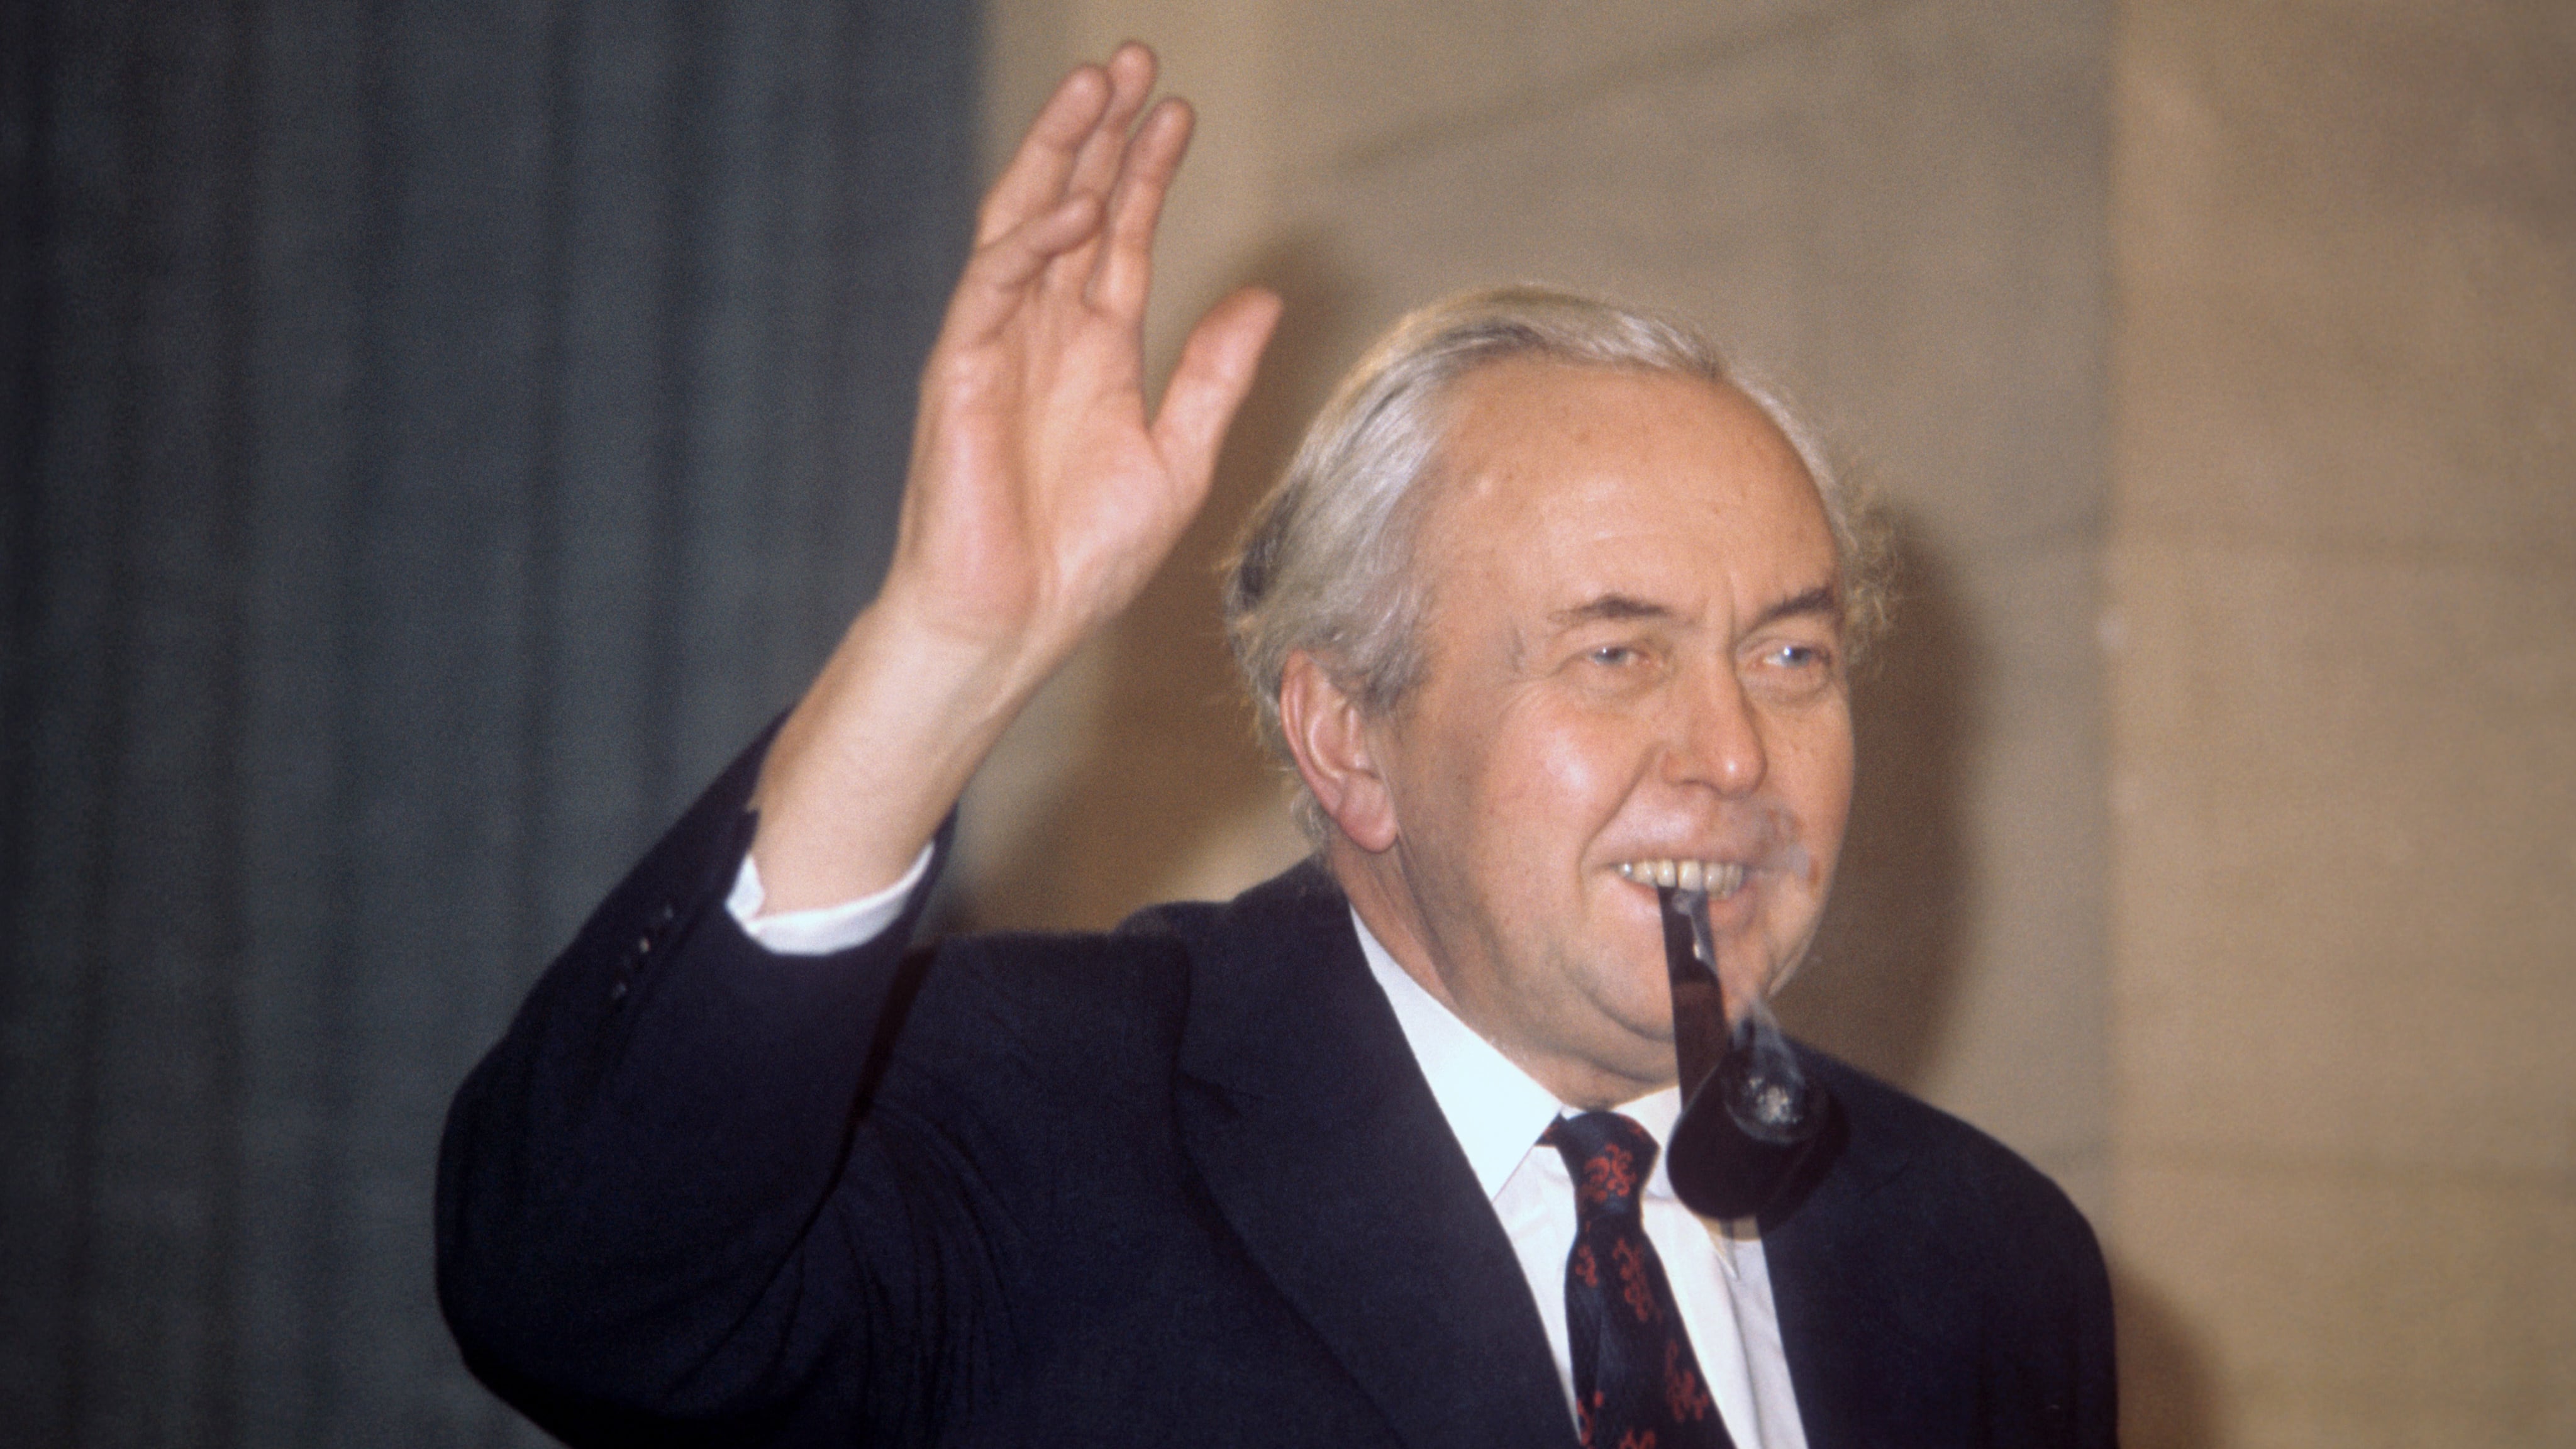 Harold Wilson had an affair with his deputy press secretary during his final years in Downing Street, his former advisers have revealed